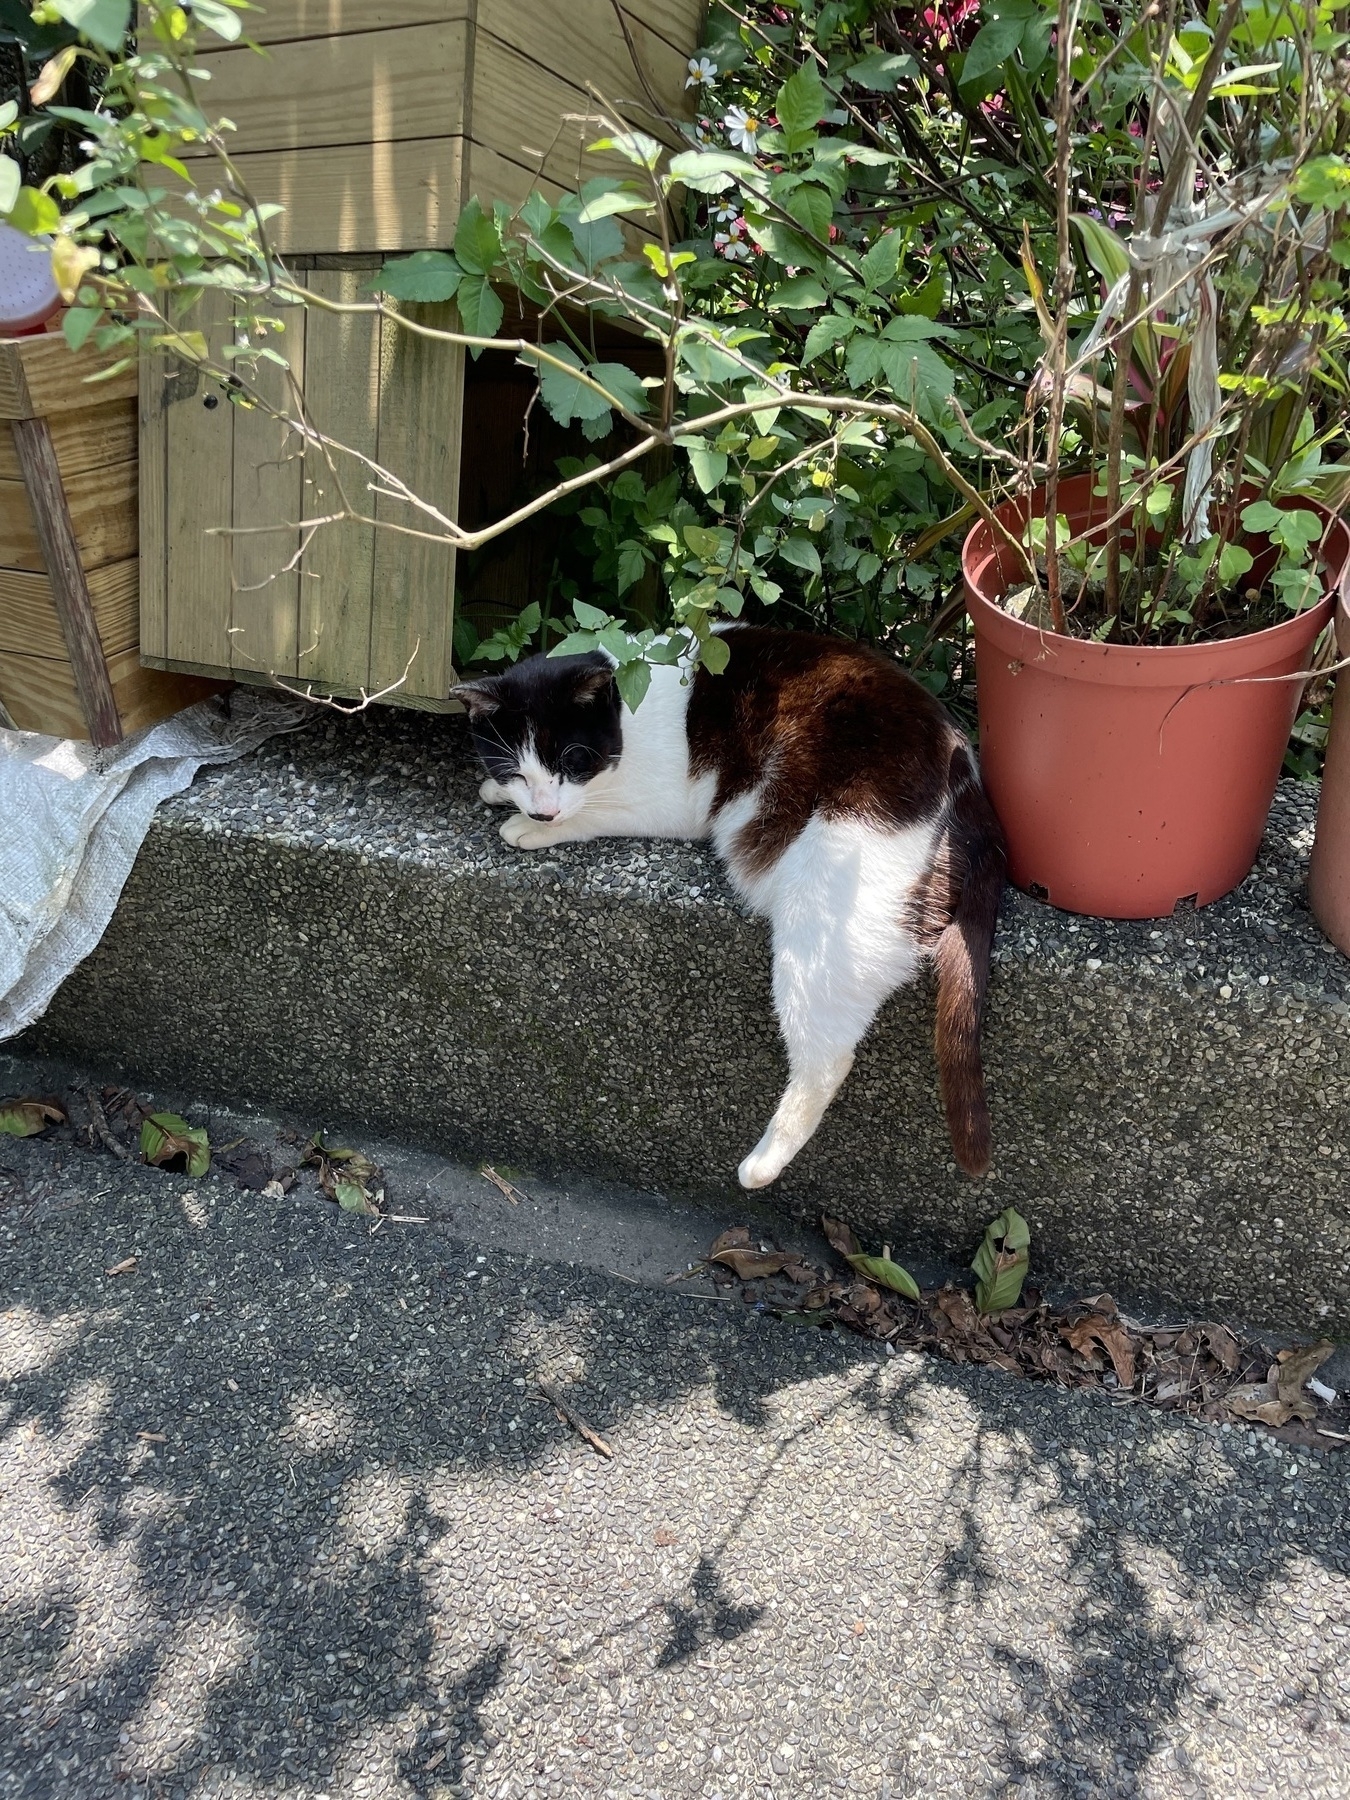 A black and white colored cat curled under the branches of a potted plant, taking cover from the sun. One of the cat's legs is laid down on the side of the ledge.